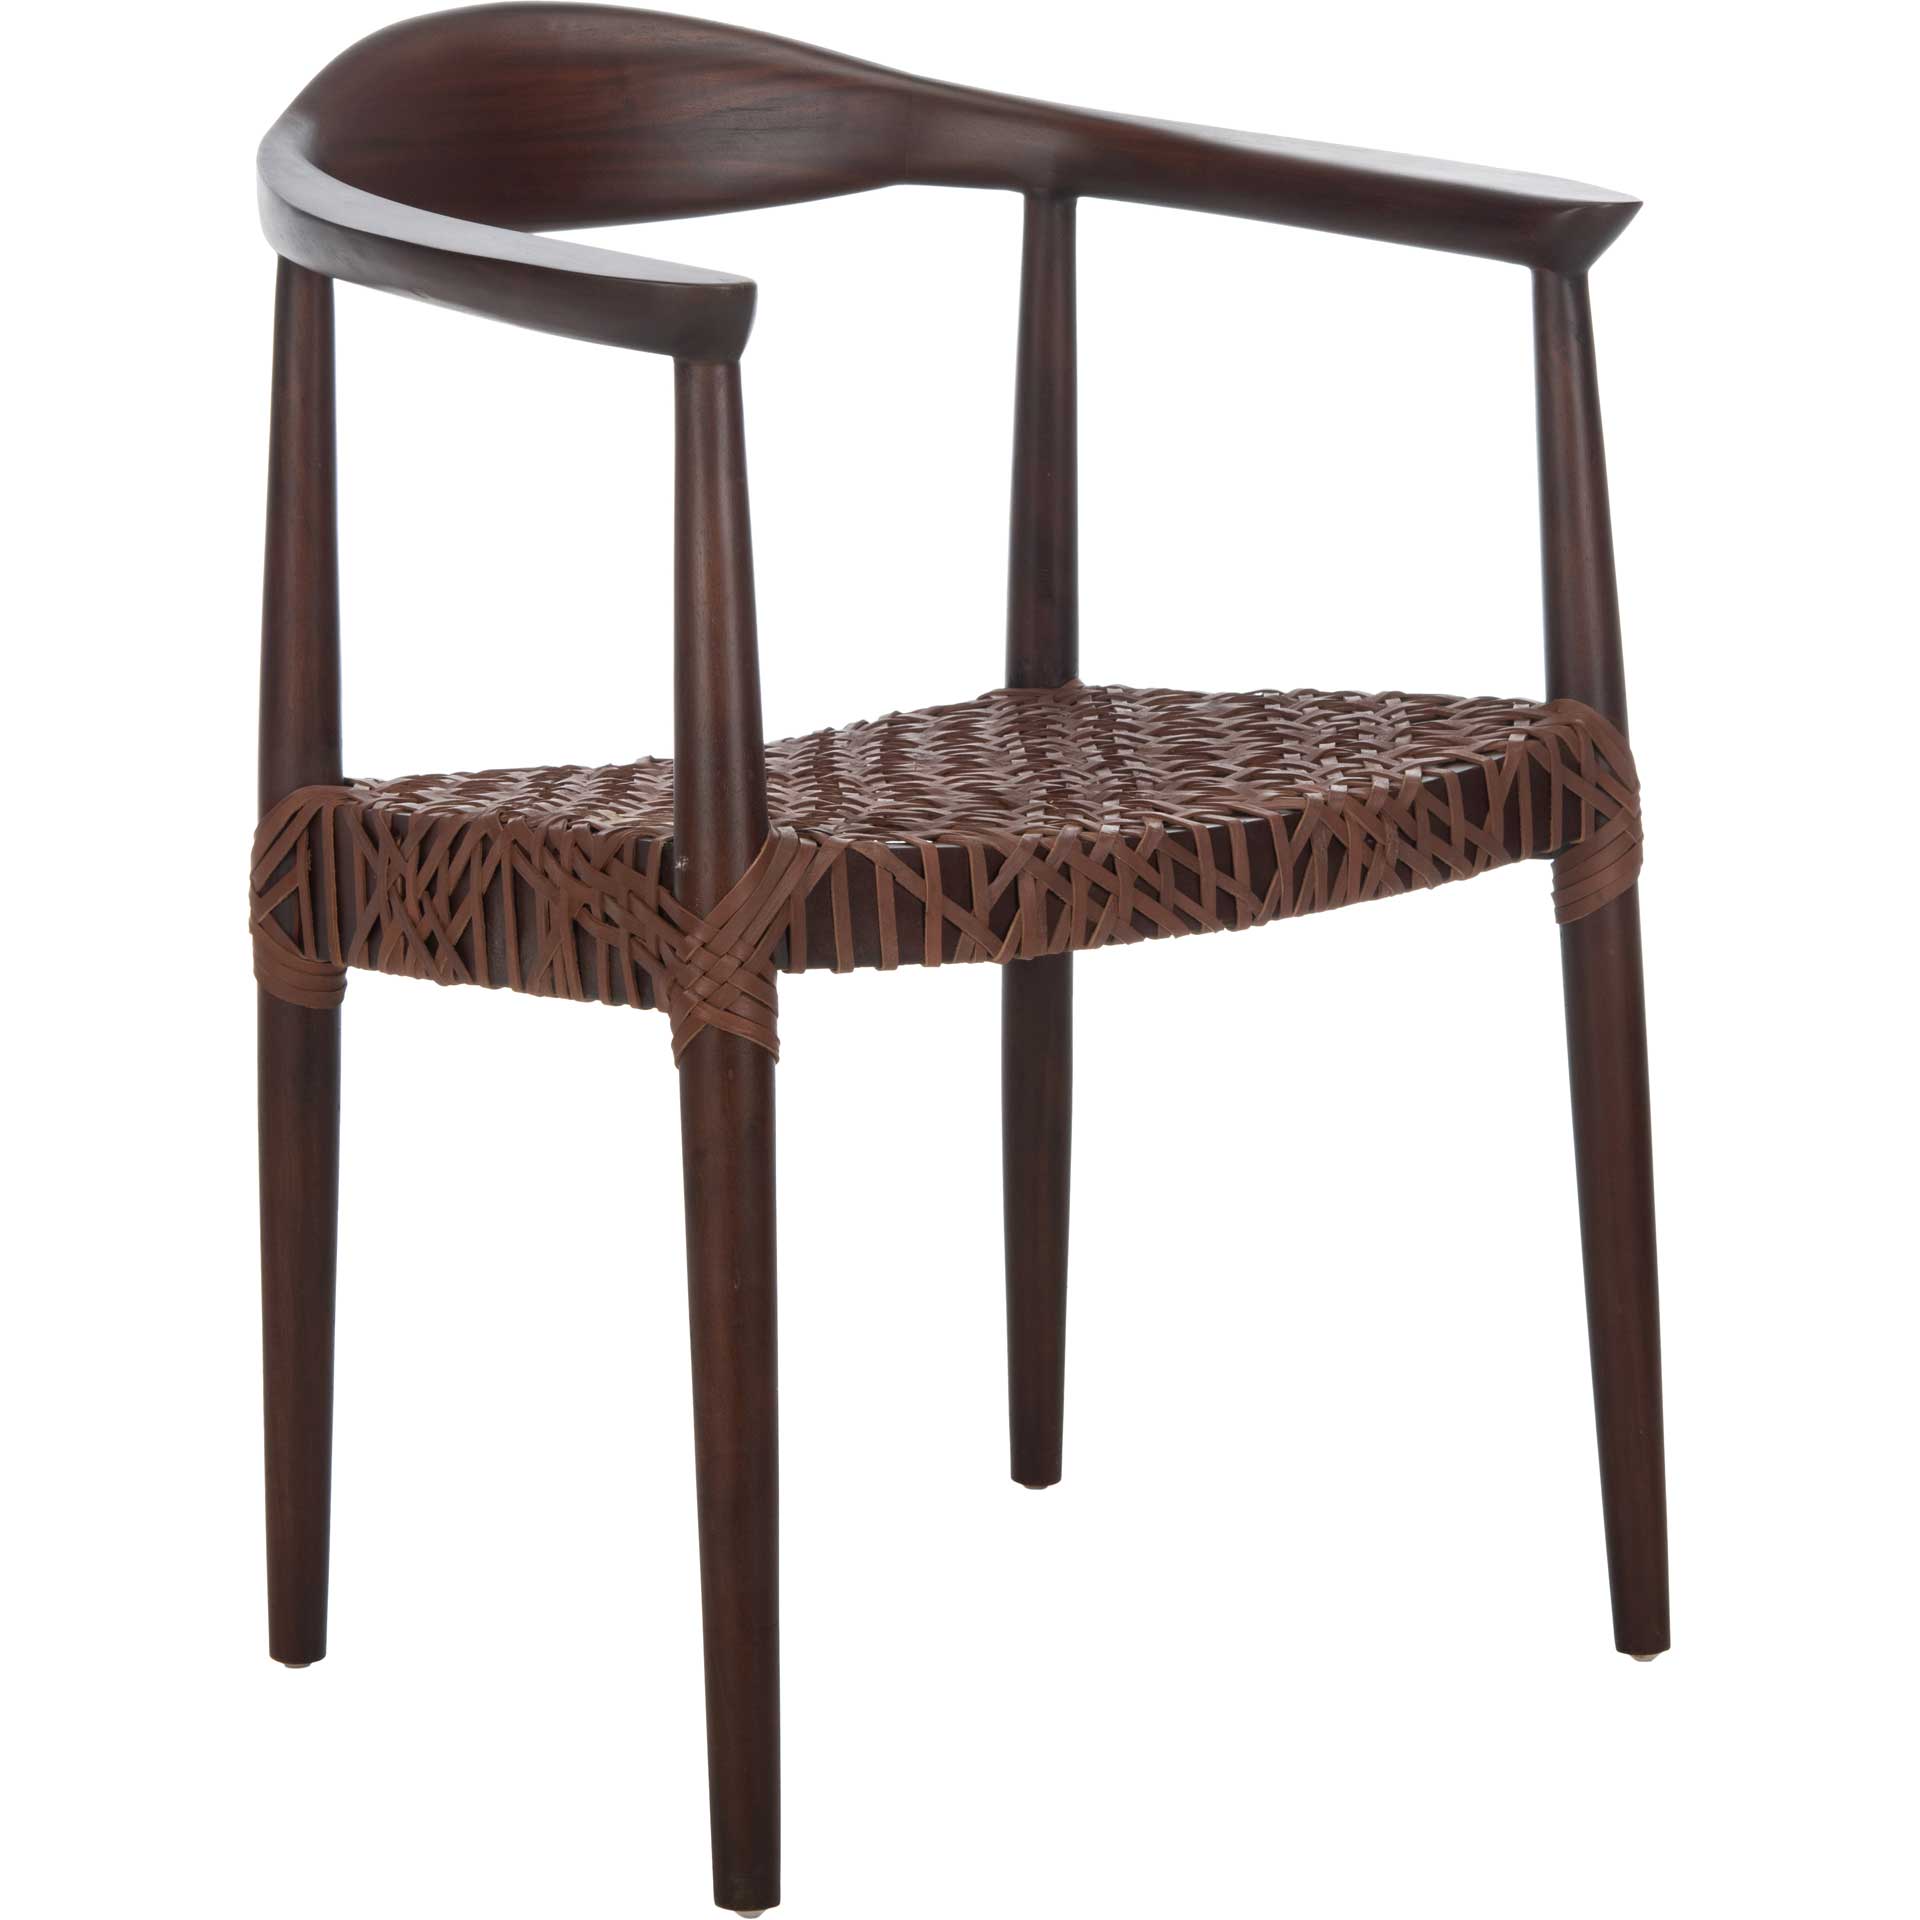 Justin Leather Woven Accent Chair Walnut/Brown